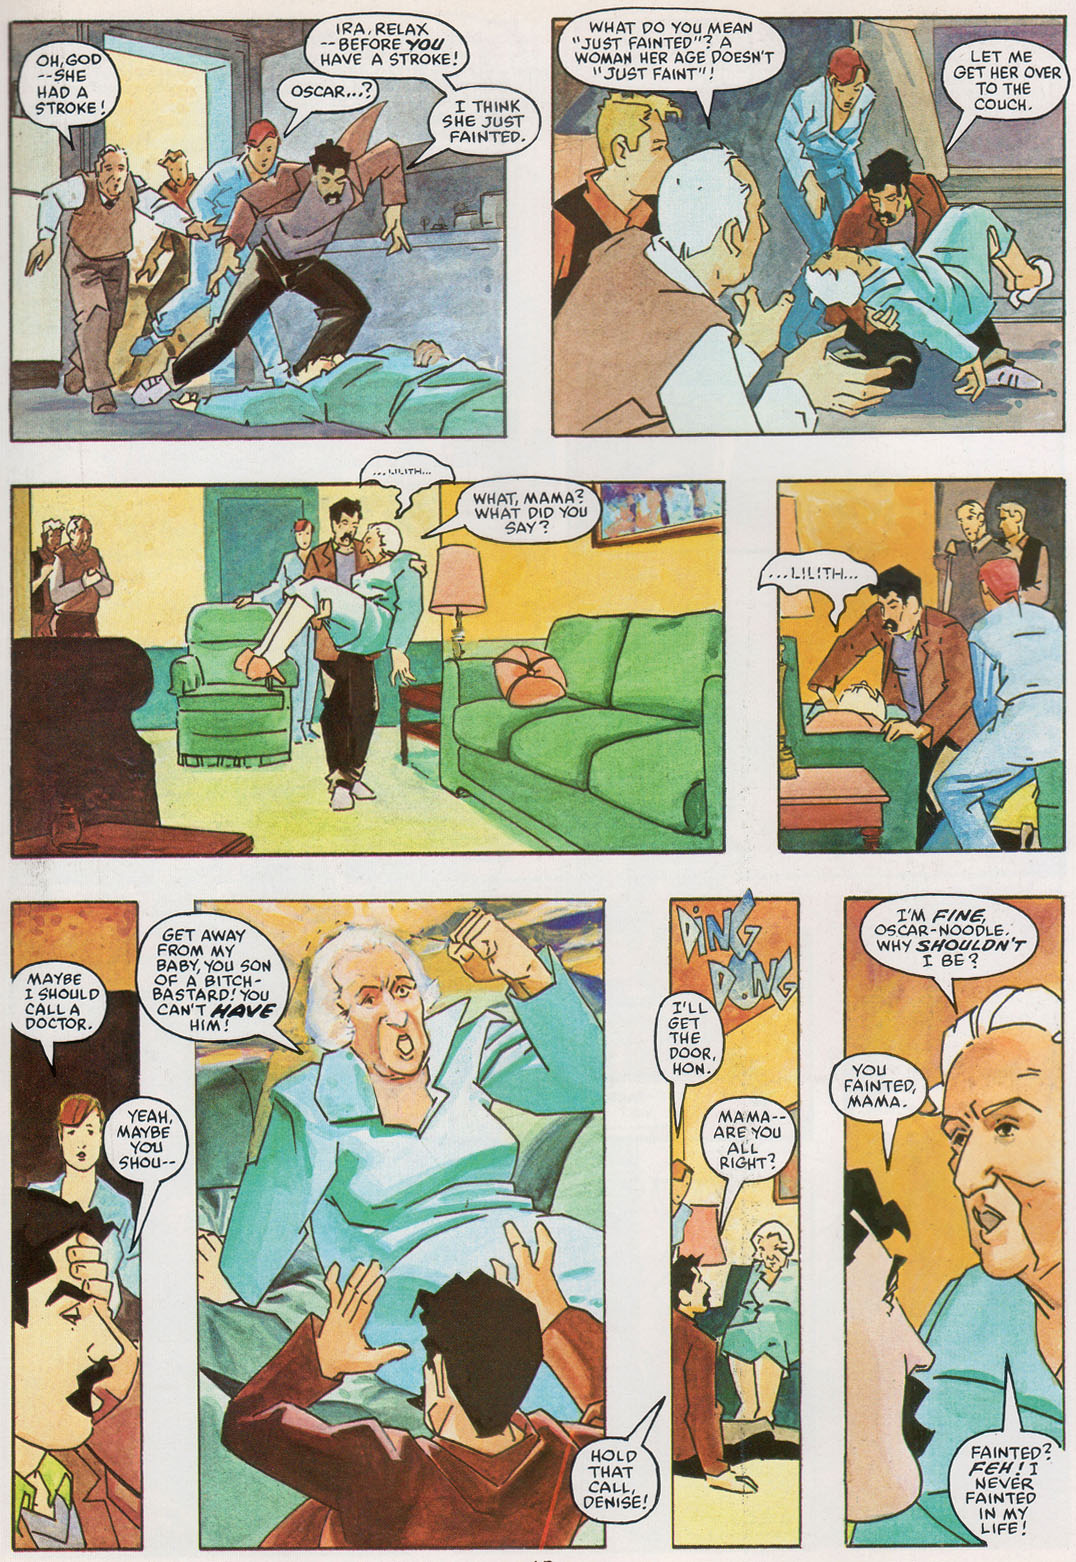 Marvel Graphic Novel issue 20 - Greenberg the Vampire - Page 19